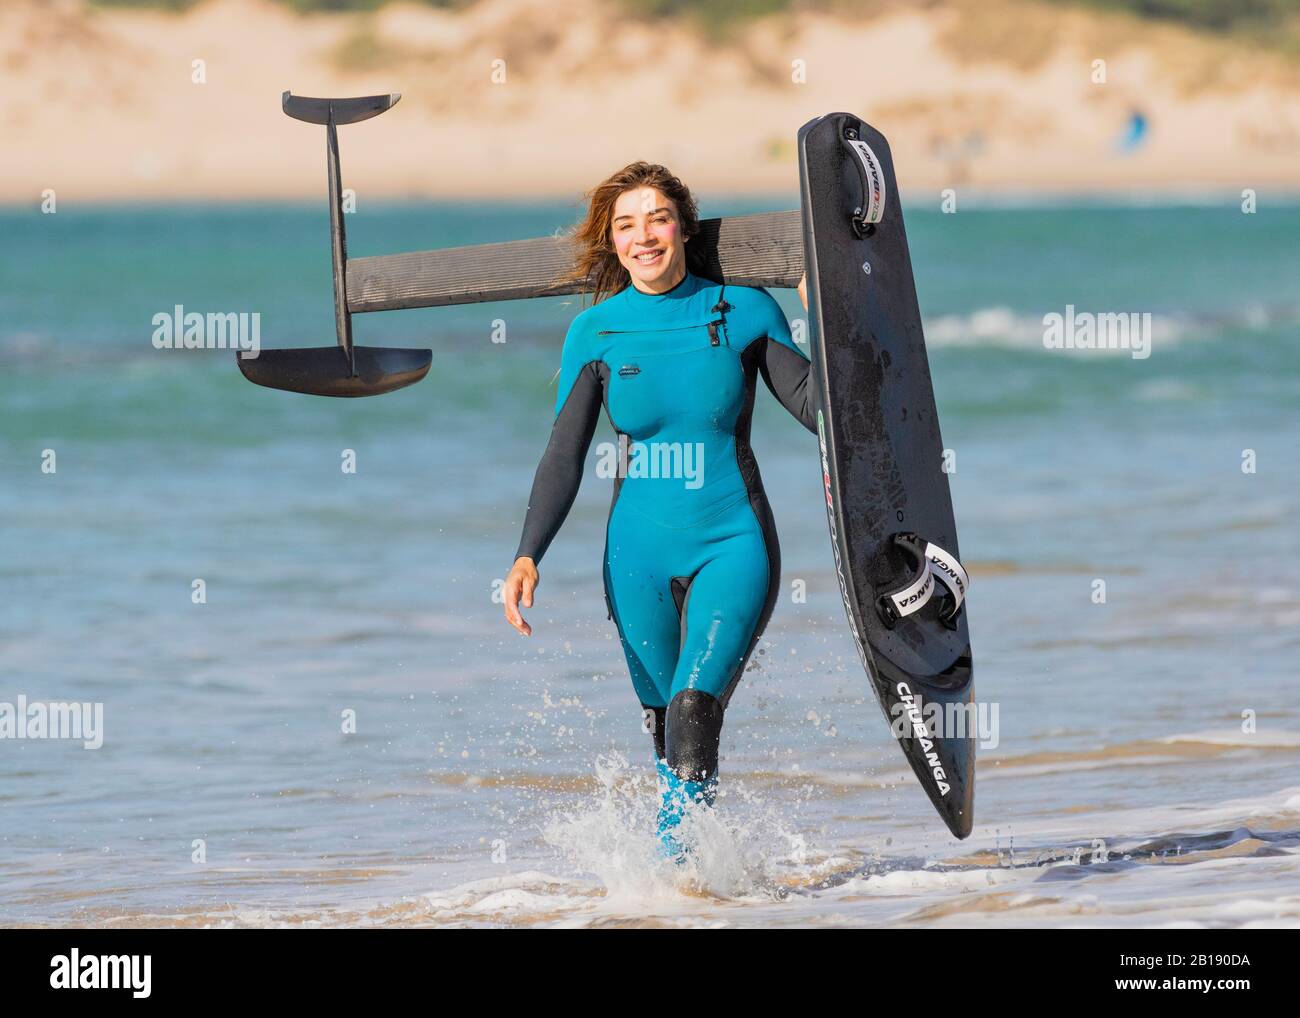 Woman with a kitesurfing racing foil board. Stock Photo